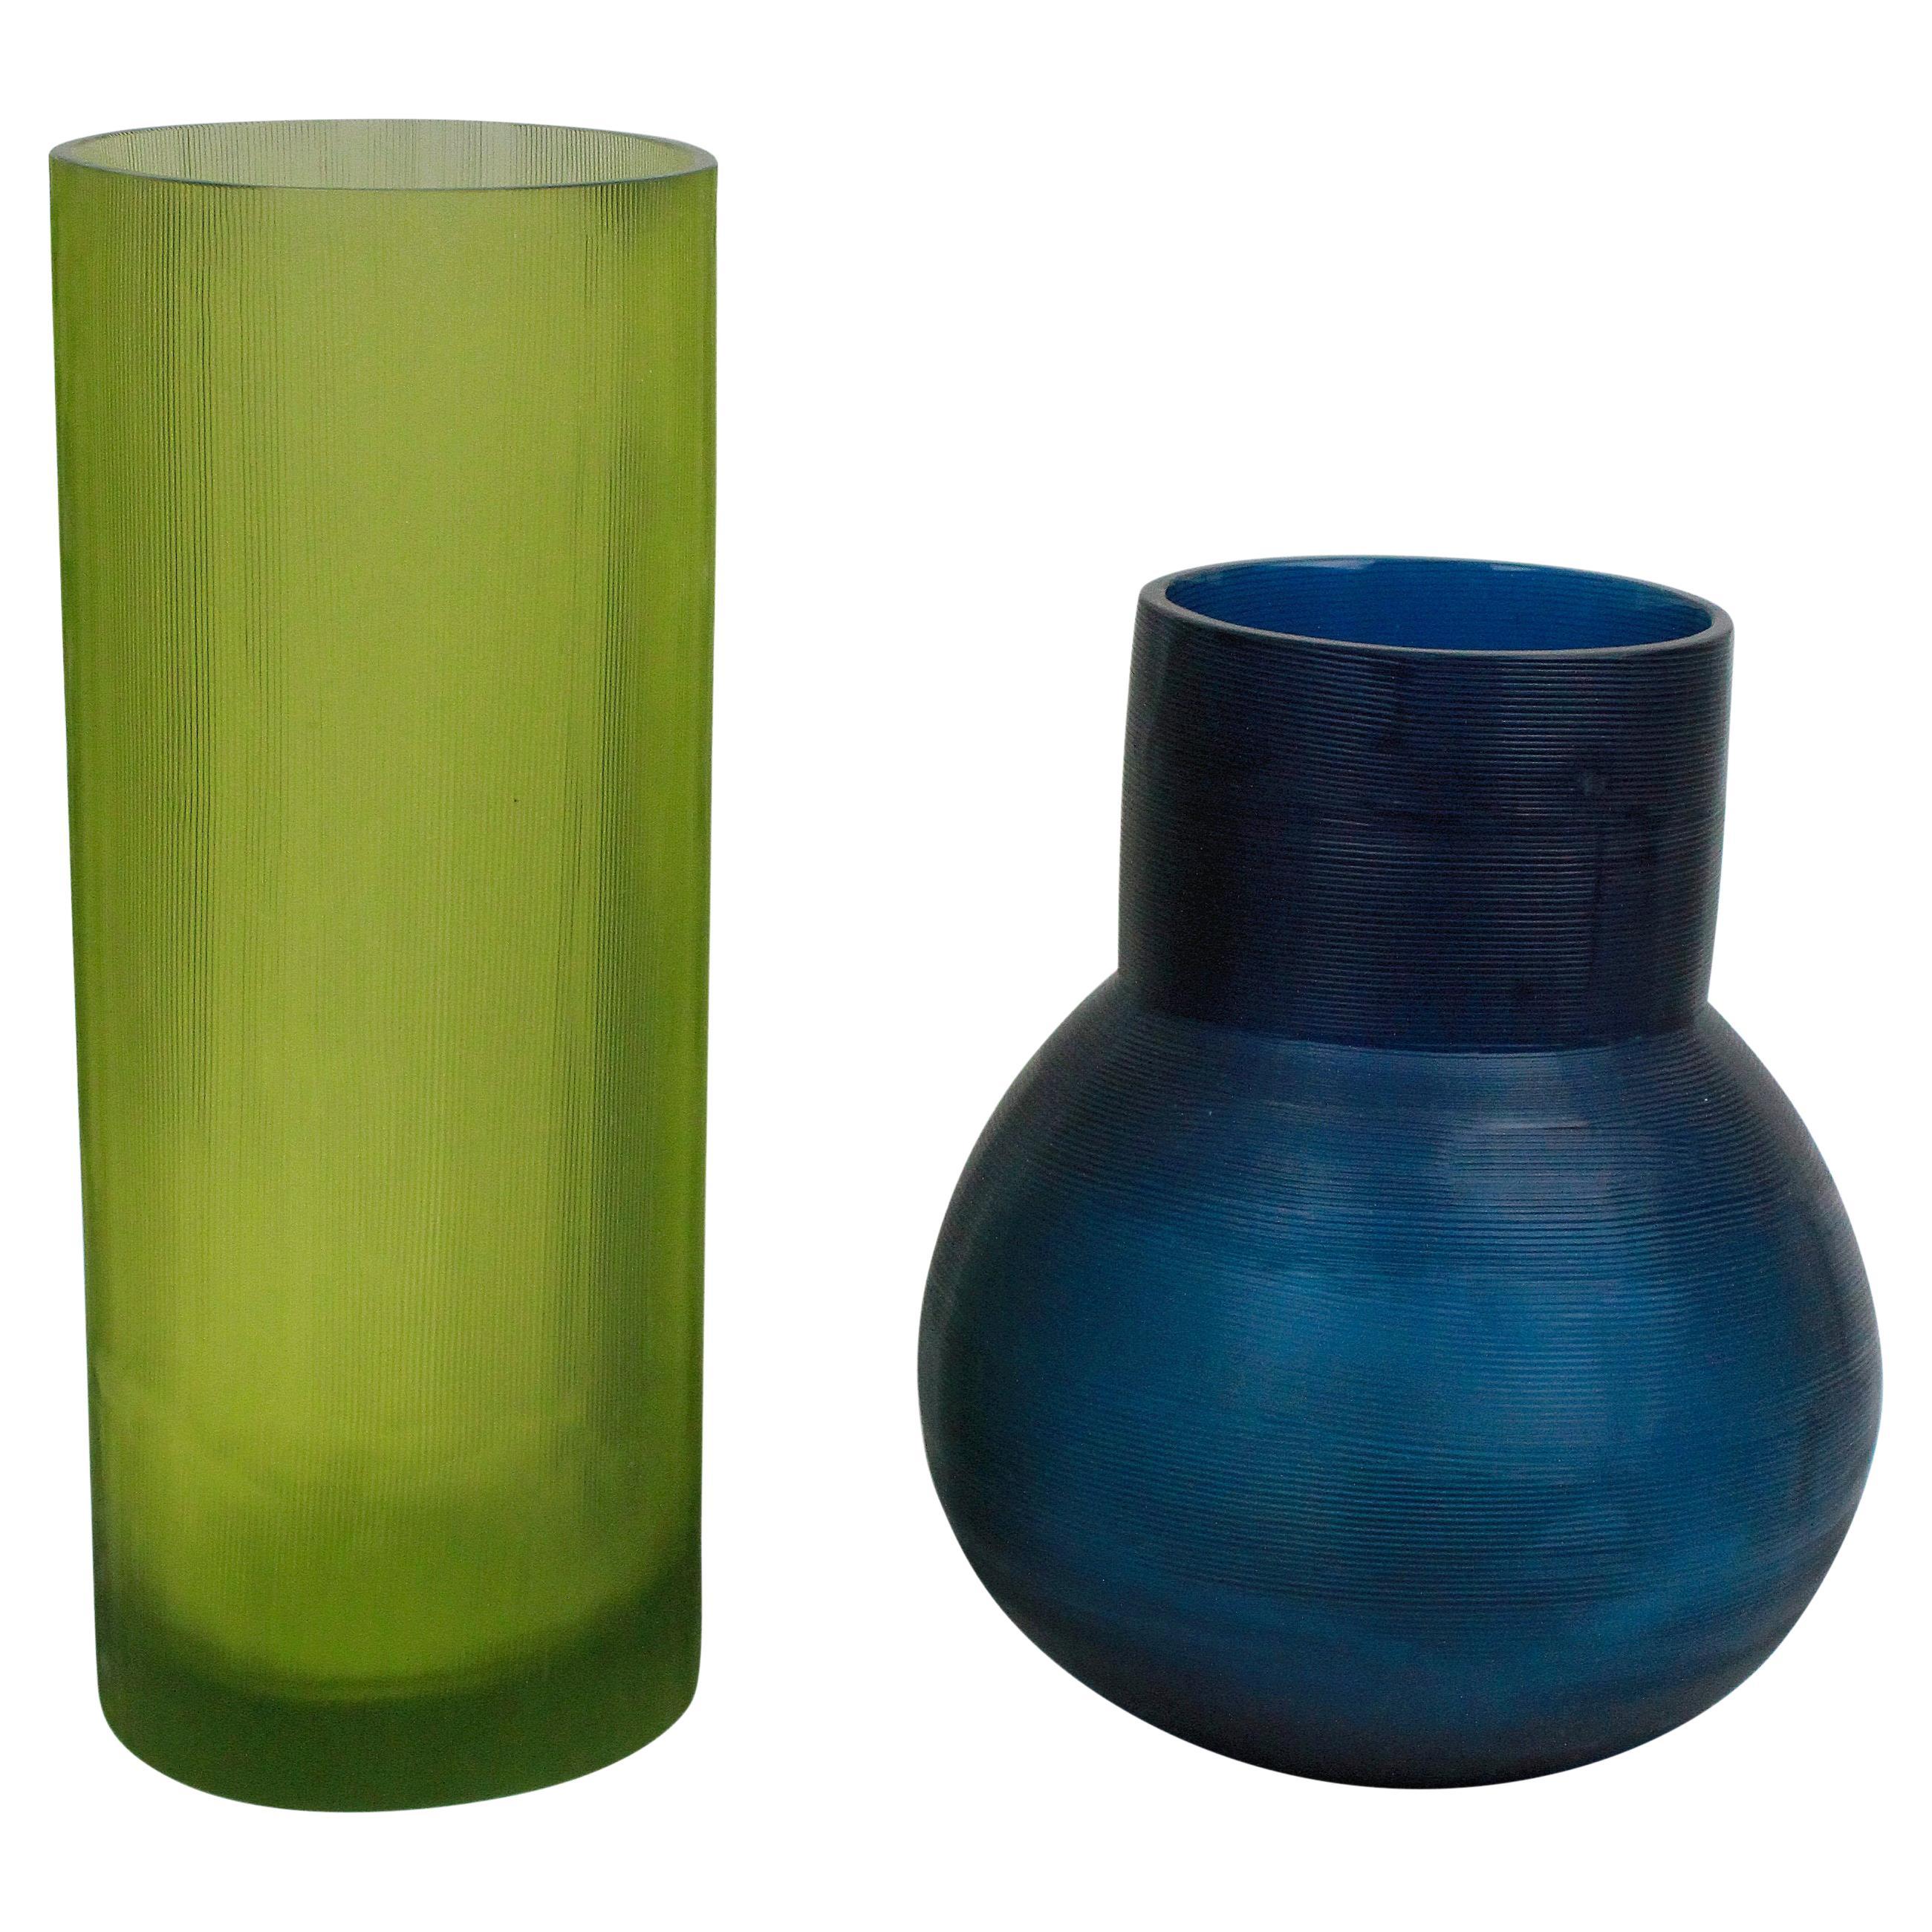 Pair of Guaxs Glass Vases in Stunning Colors